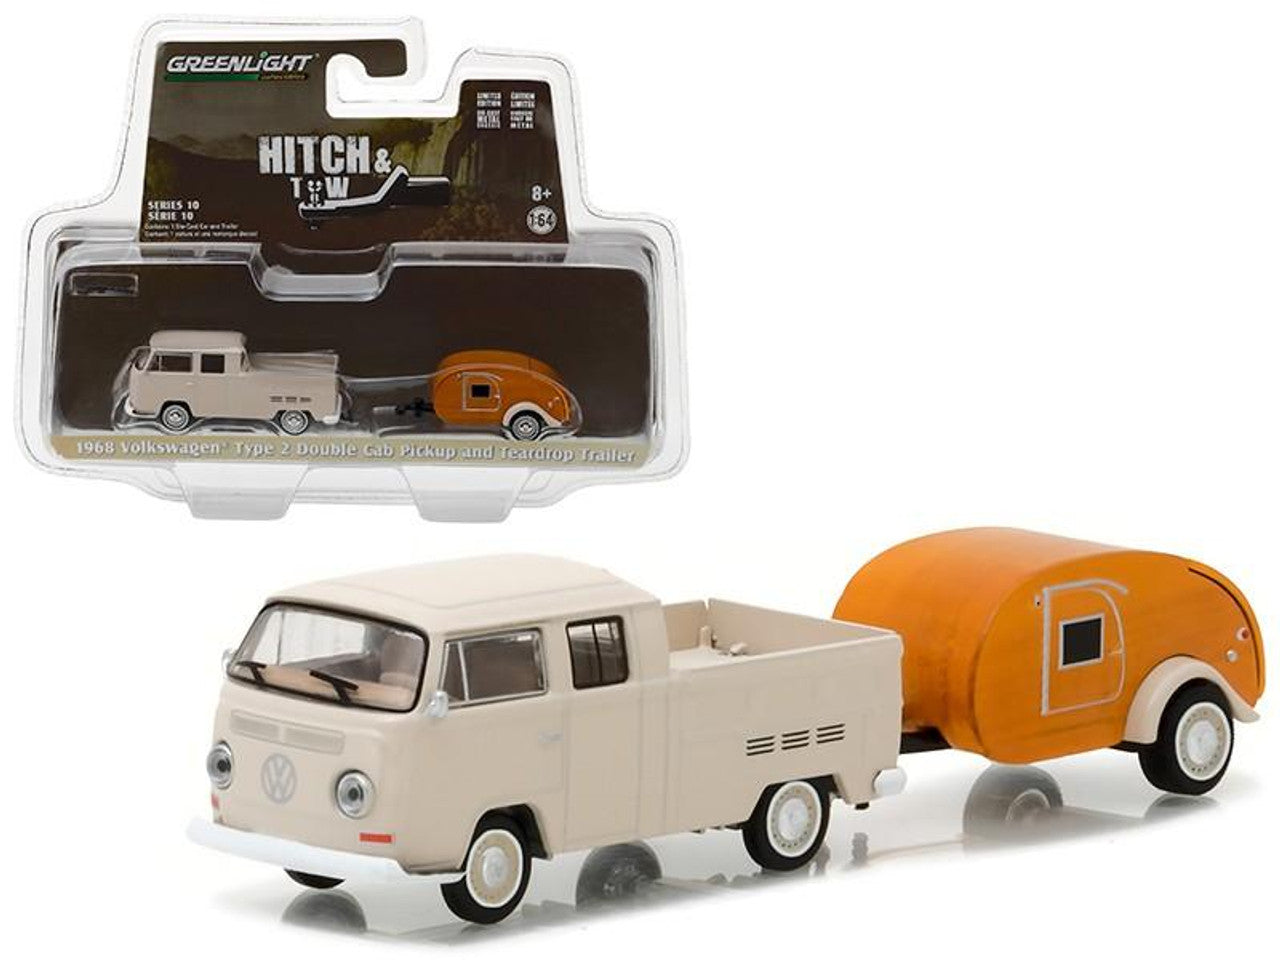 1/64 1968 VOLKSWAGEN TYPE 2 DOUBLE CAB PICKUP AND TEARDROP TRAILER - HITCH & TOW